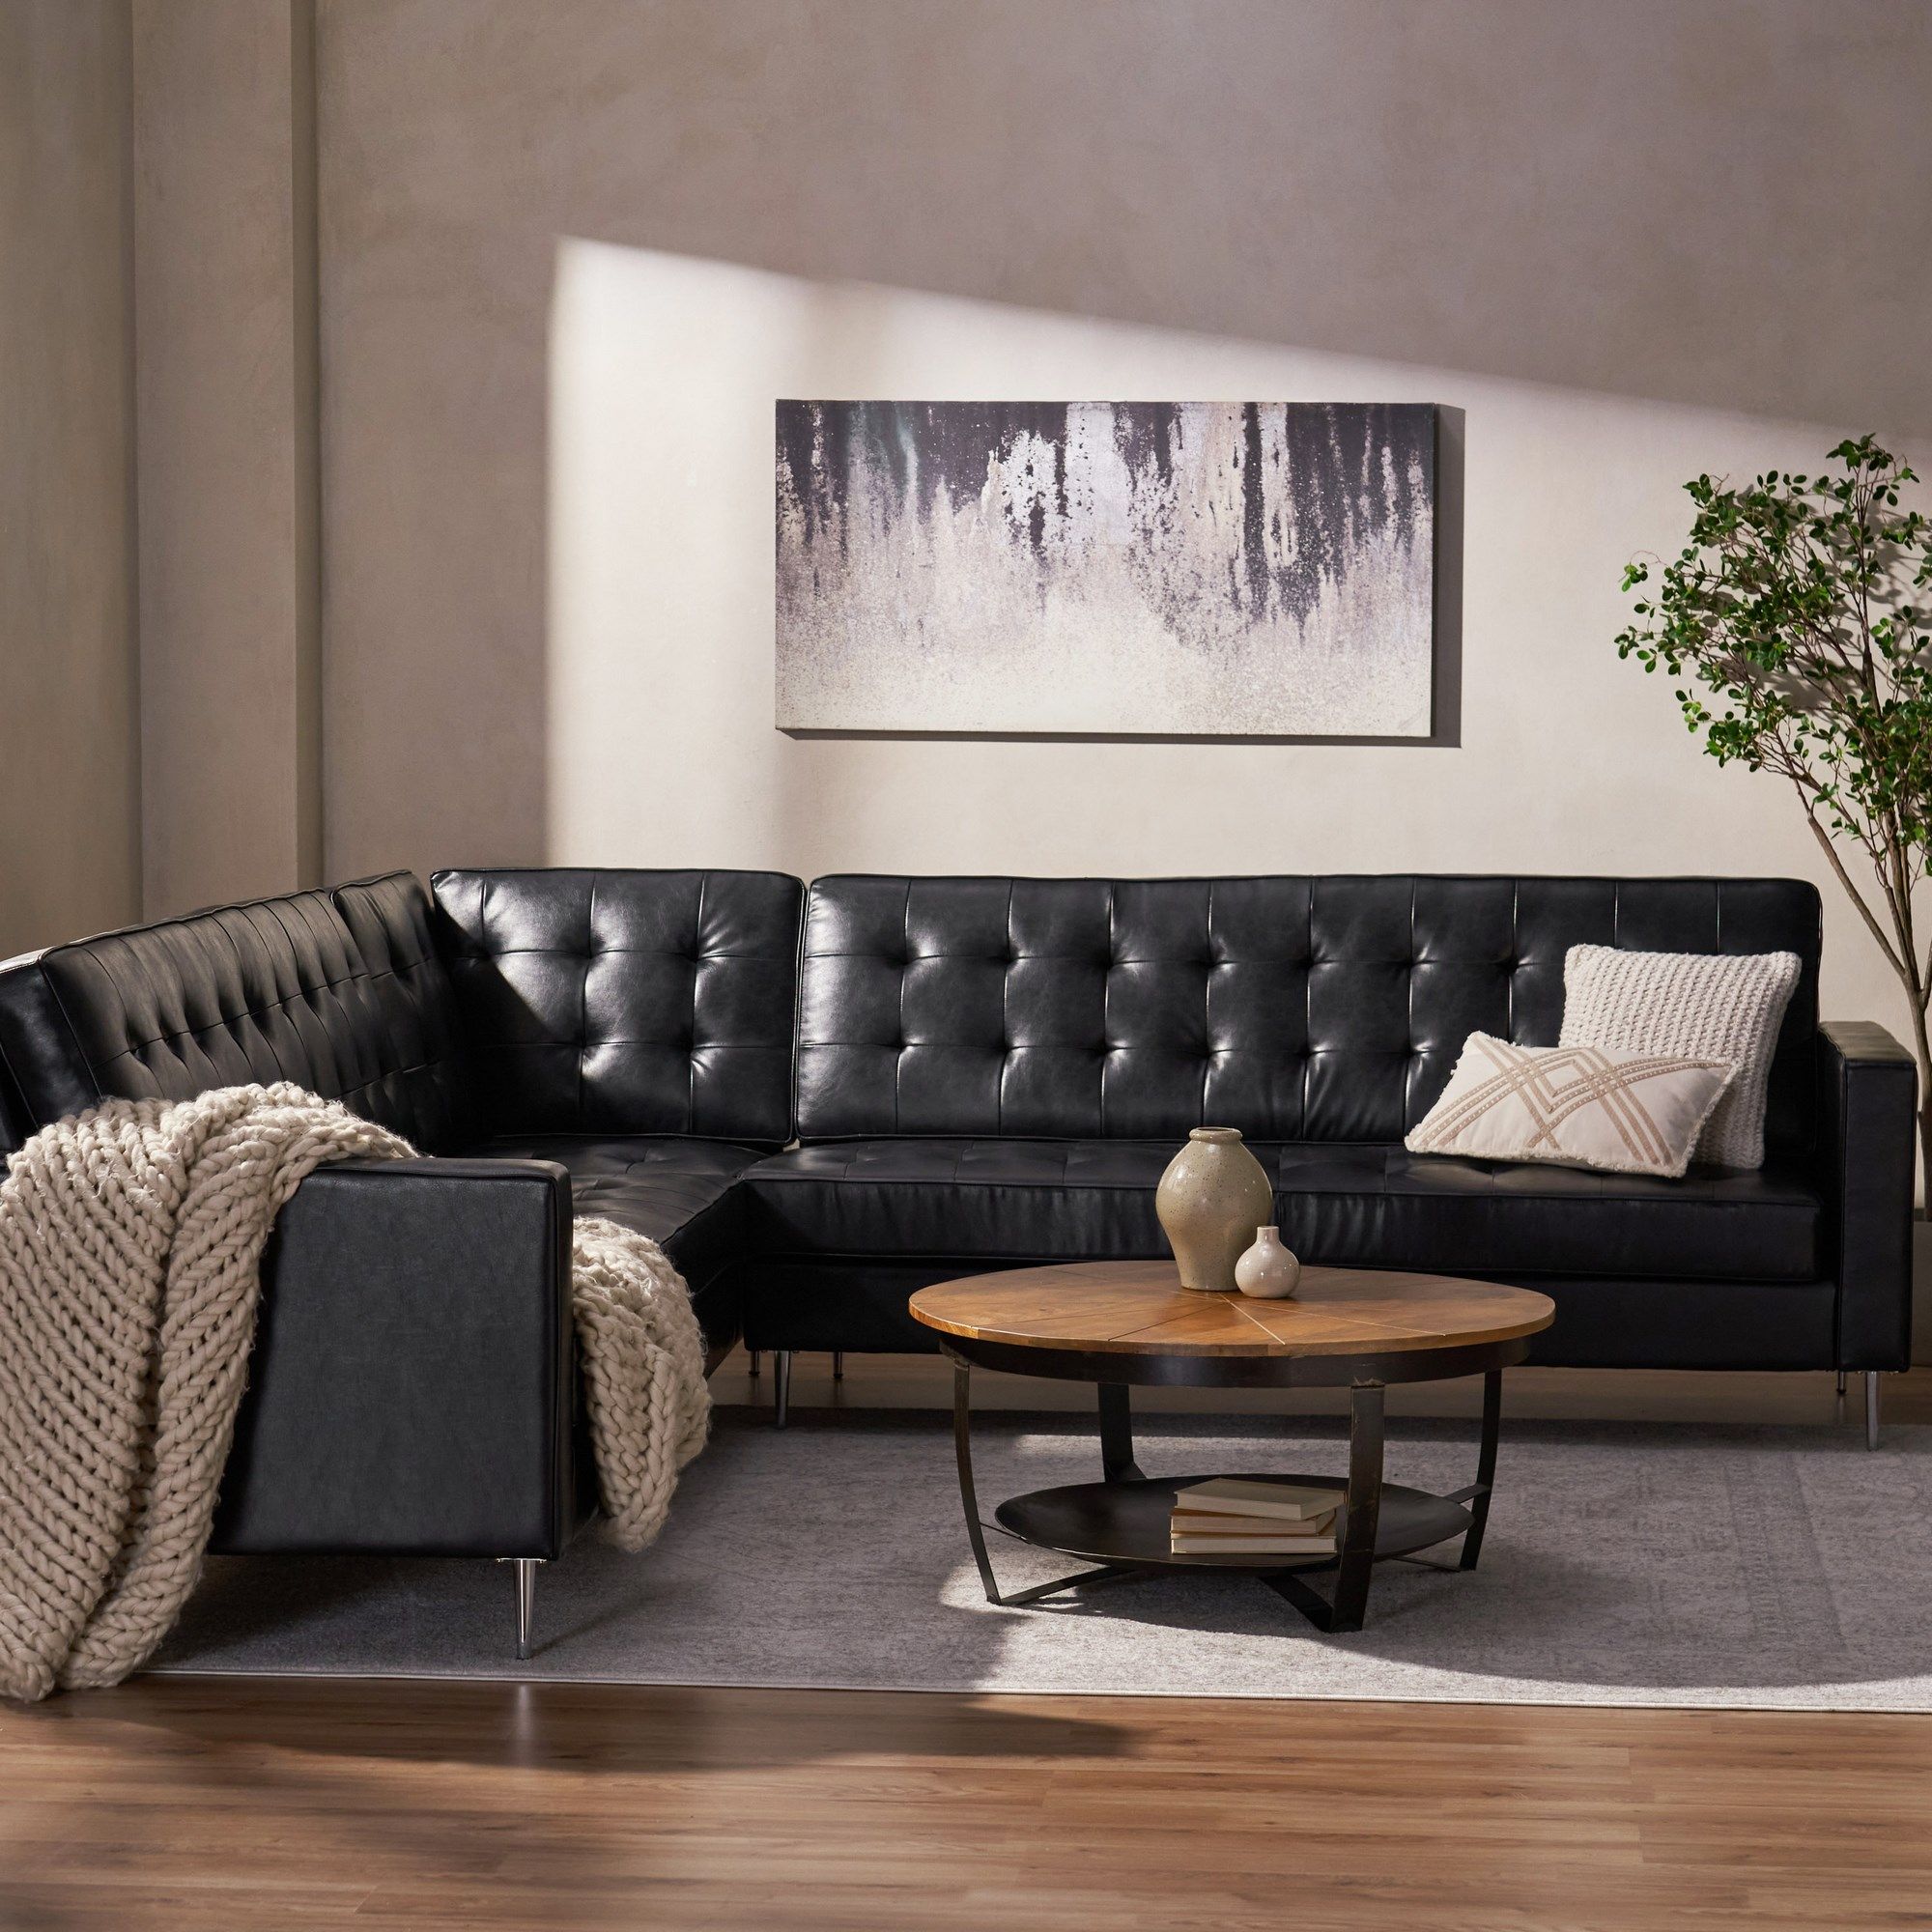 Gebo Contemporary Faux Leather Tufted 5 Seater Sectional Sofa Set, Midnight  Black And Chrome Intended For Faux Leather Sectional Sofa Sets (View 11 of 15)